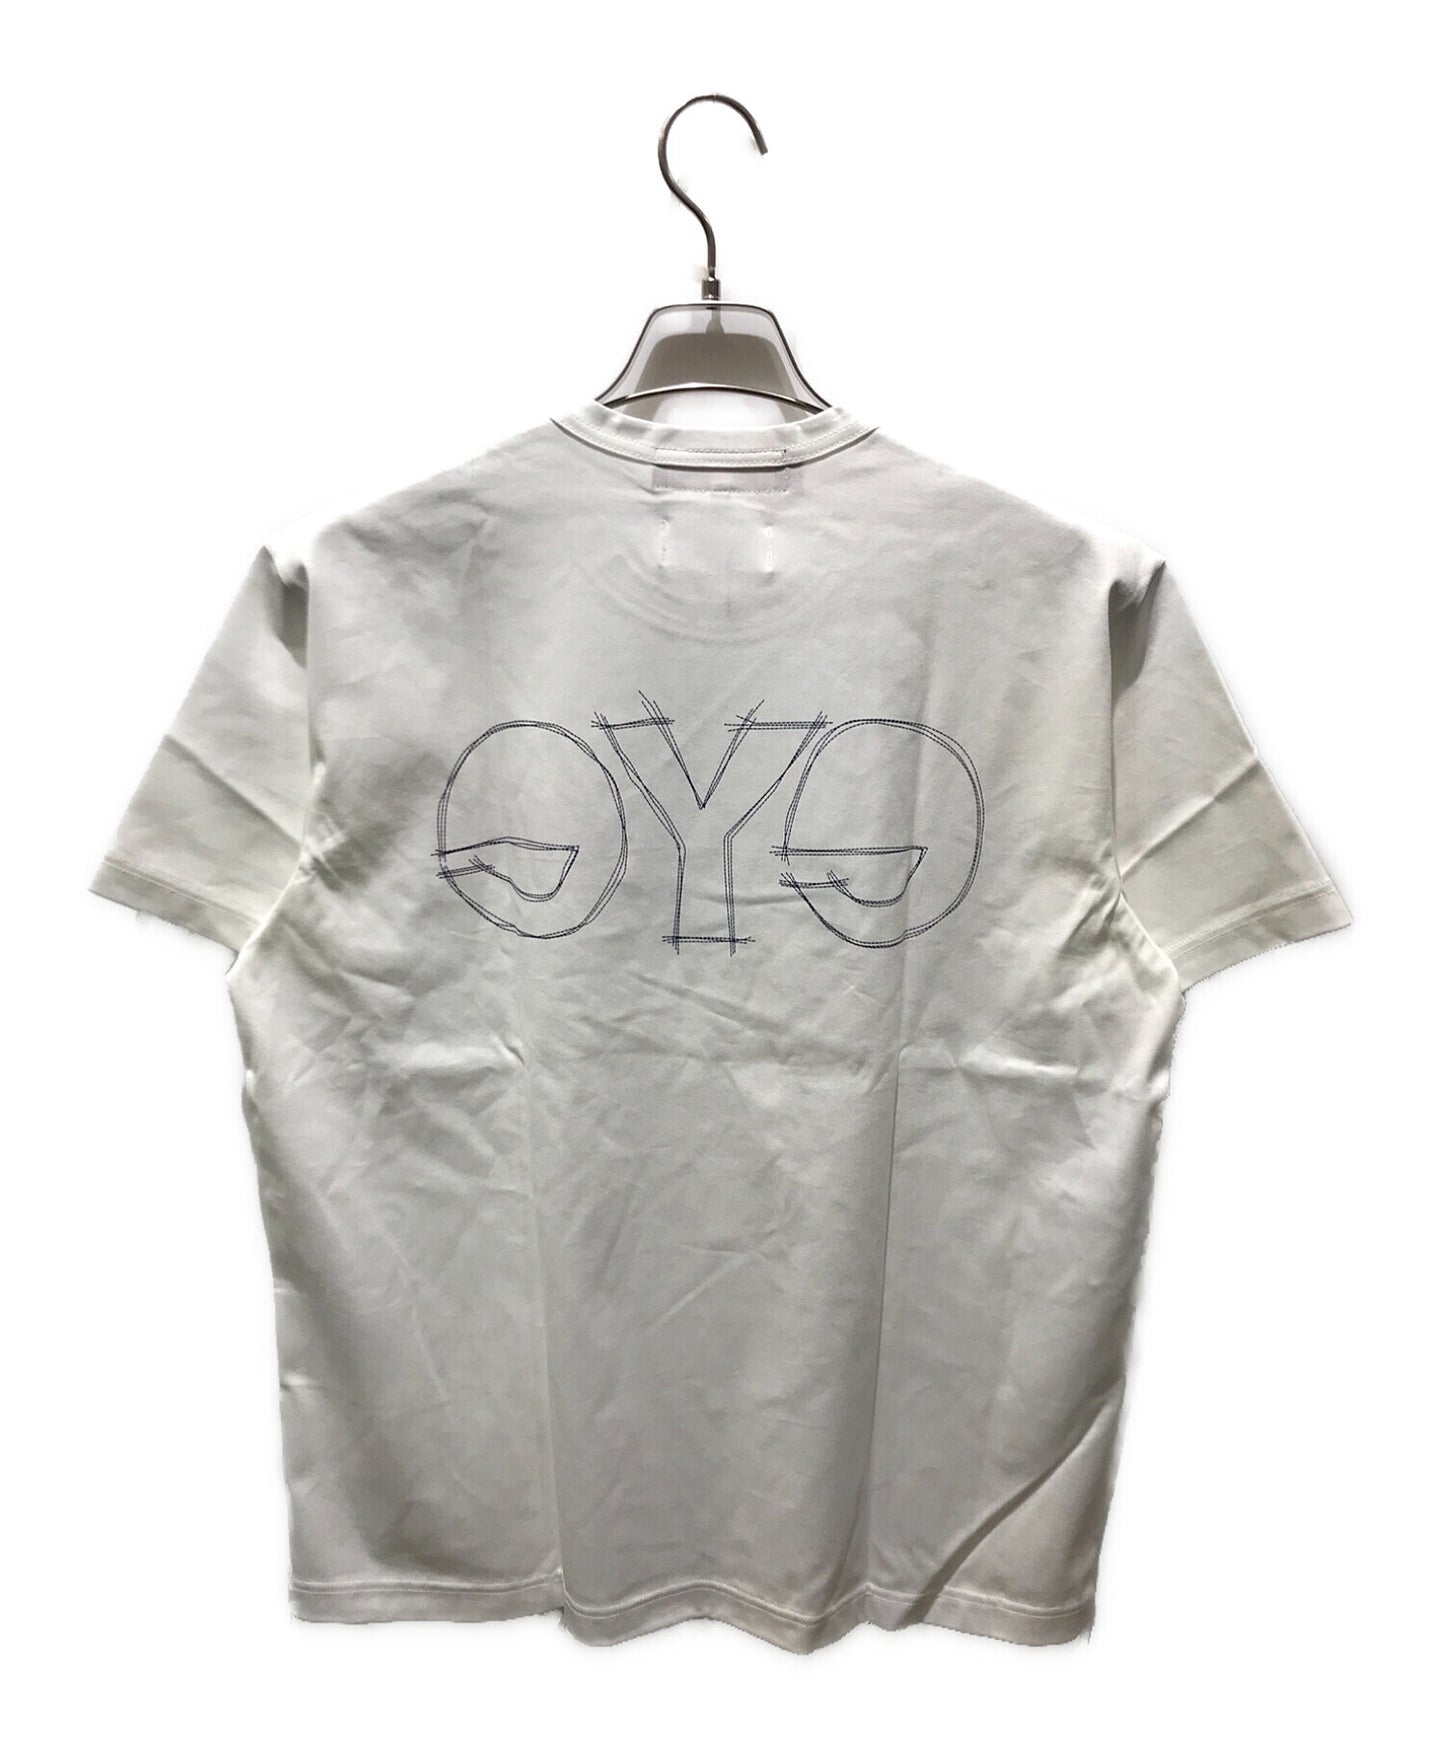 [Pre-owned] eYe COMME des GARCONS JUNYAWATANABE MAN Cotton degree-filled jersey WK-T911-100-1-2 23SS WK-T911-100-1-2